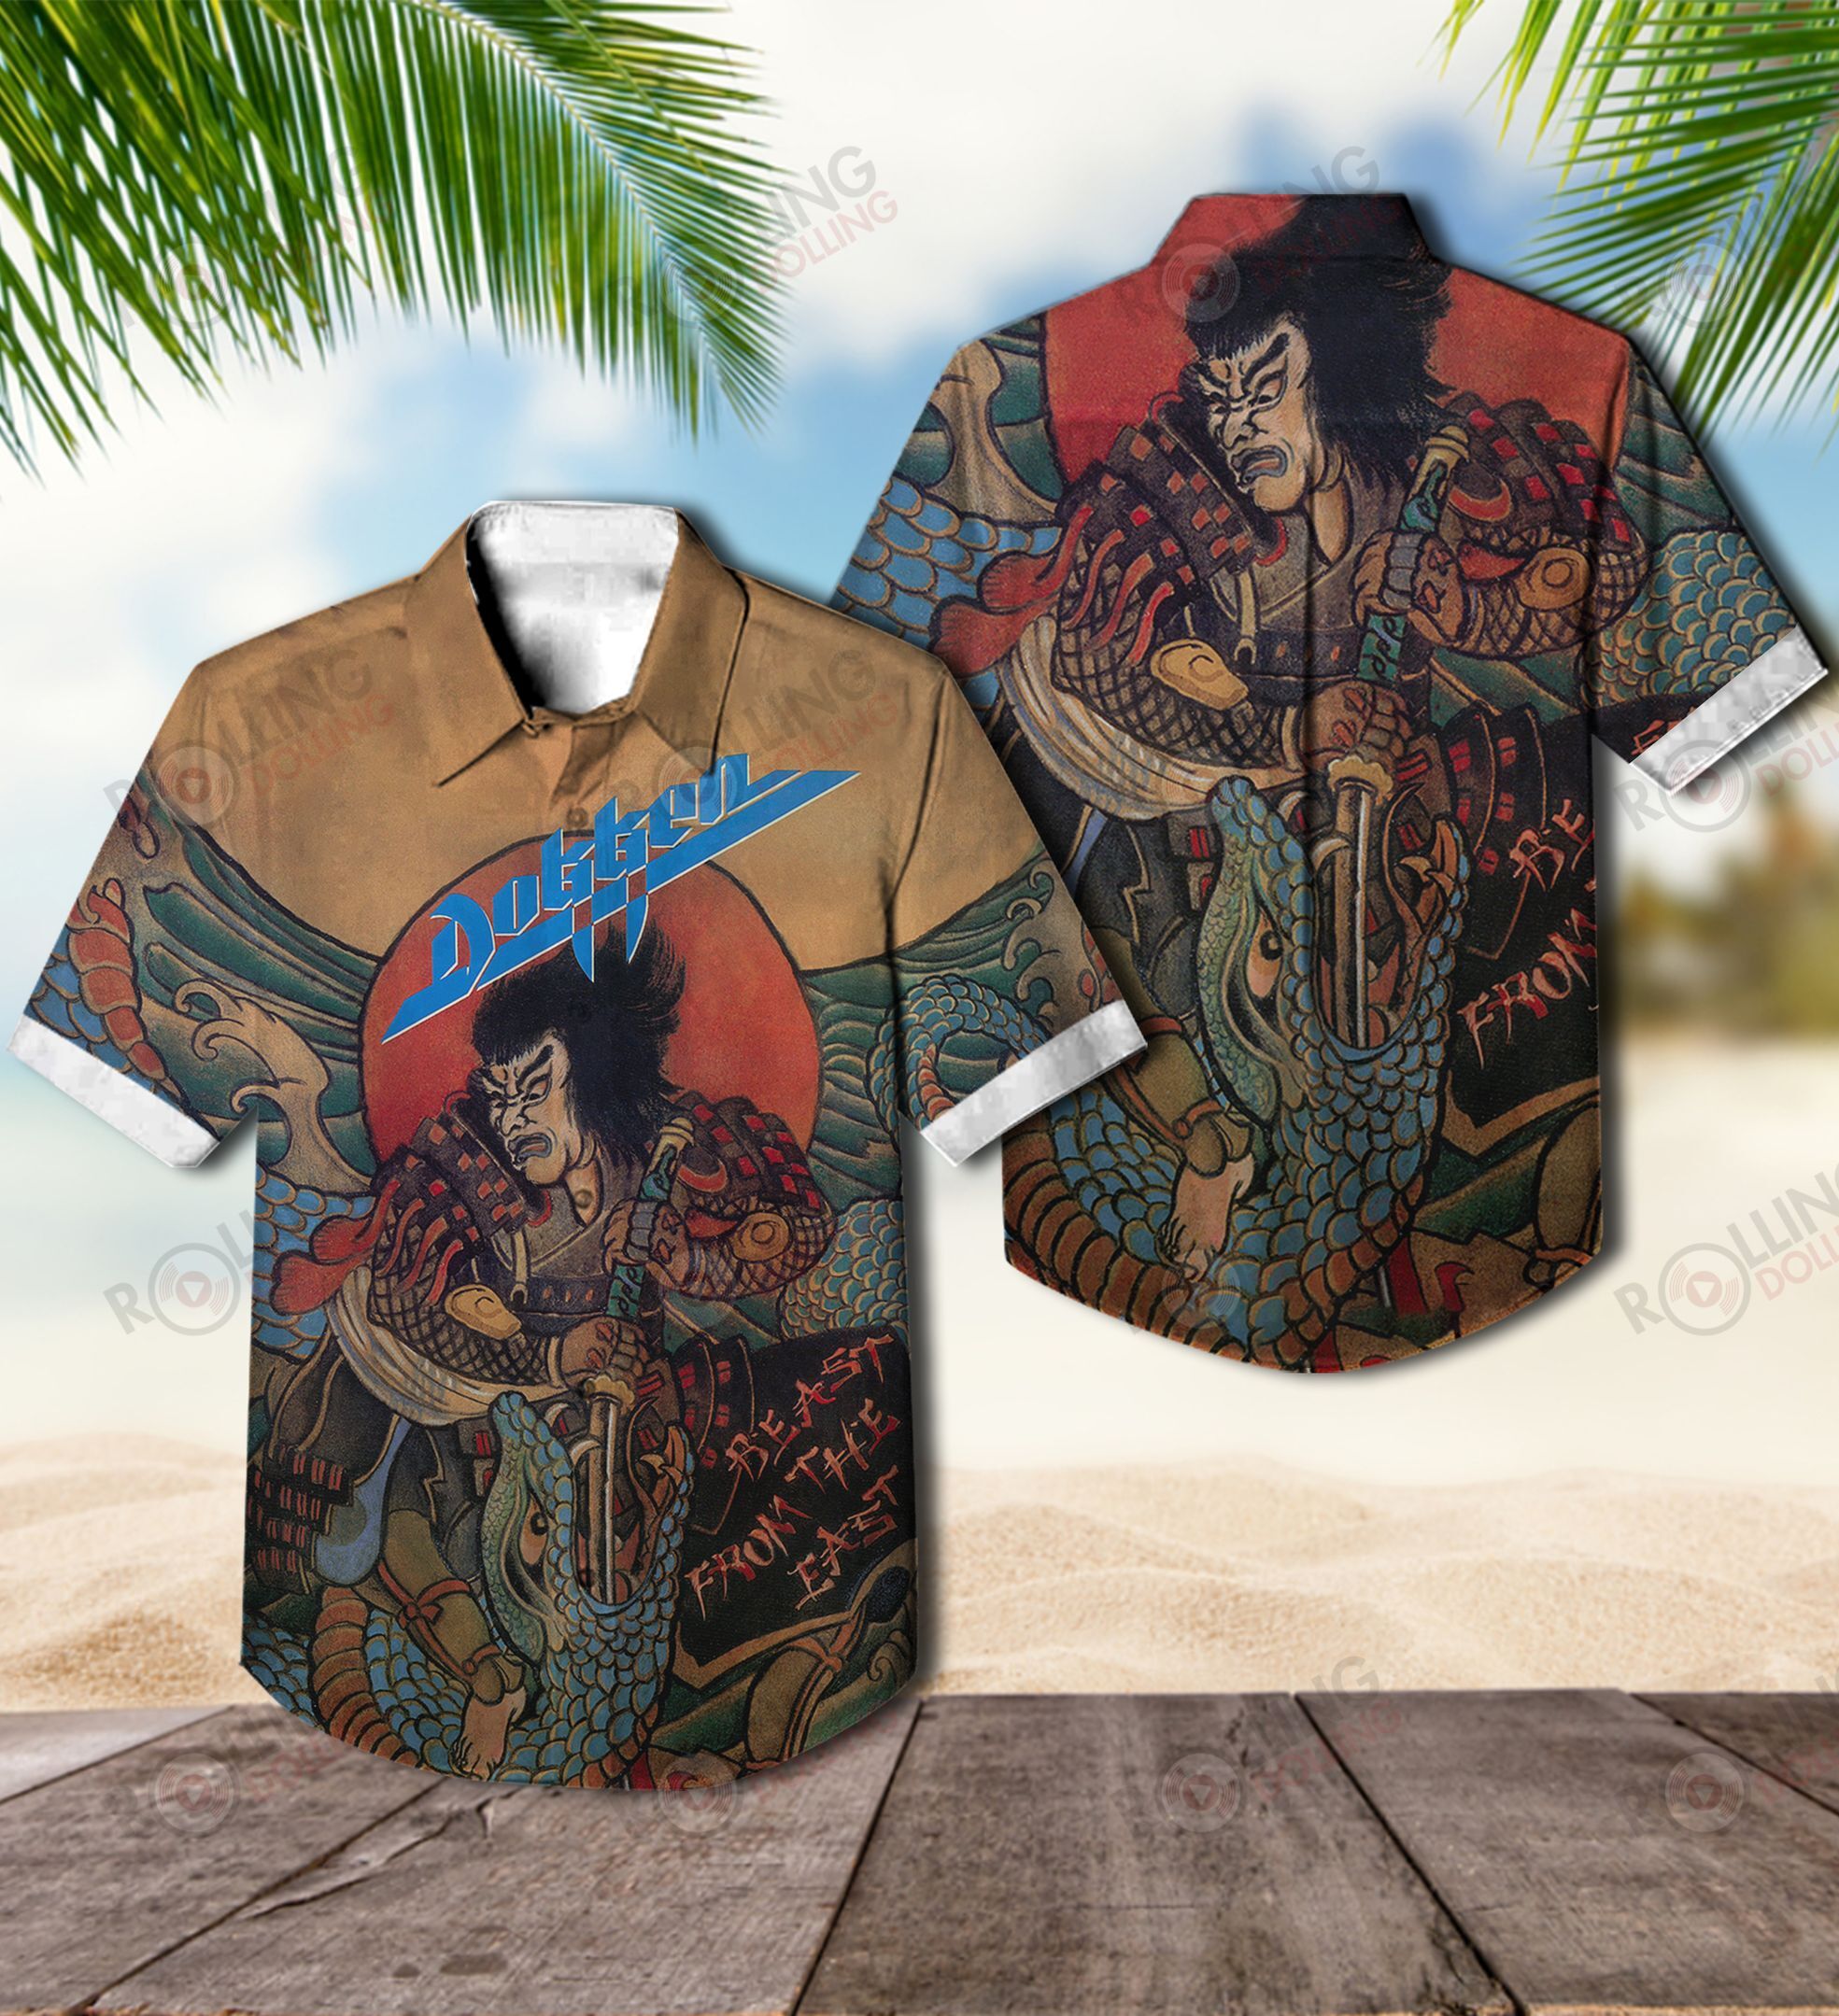 You'll have the perfect vacation outfit with this Hawaiian shirt 233